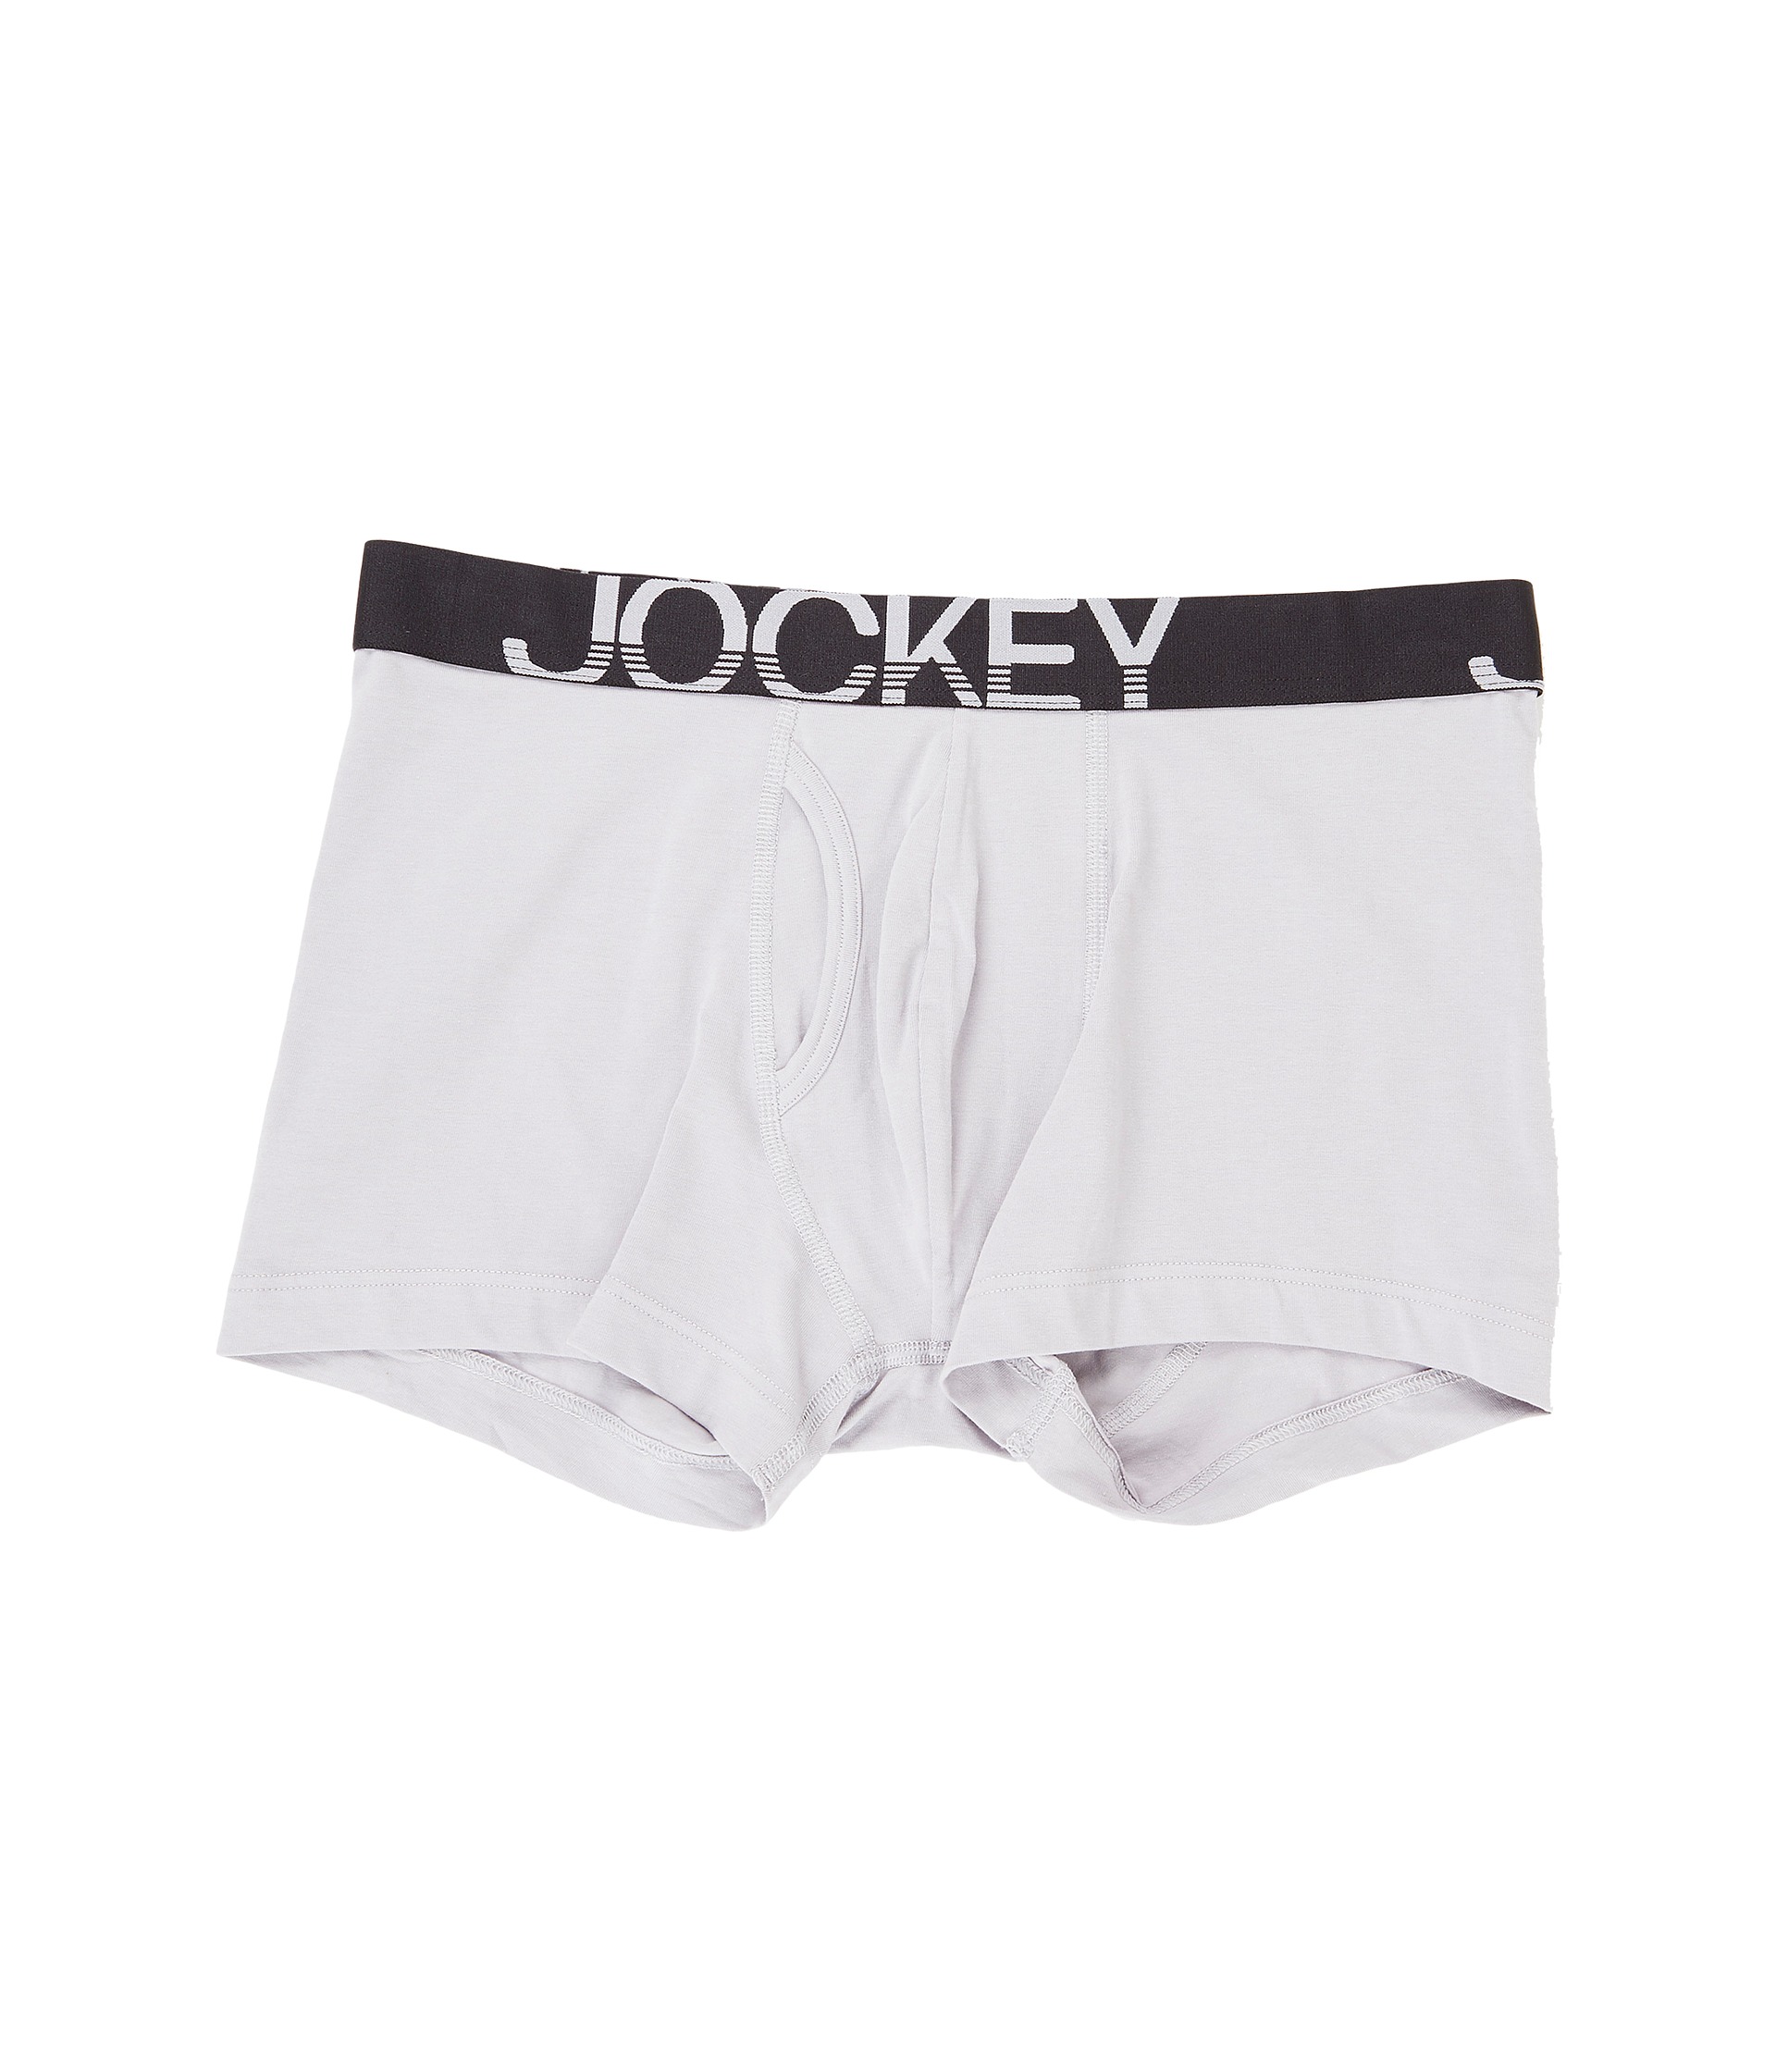 Jockey Cotton Low Rise Stretch No Ride Boxer Brief 3-Pack at Zappos.com